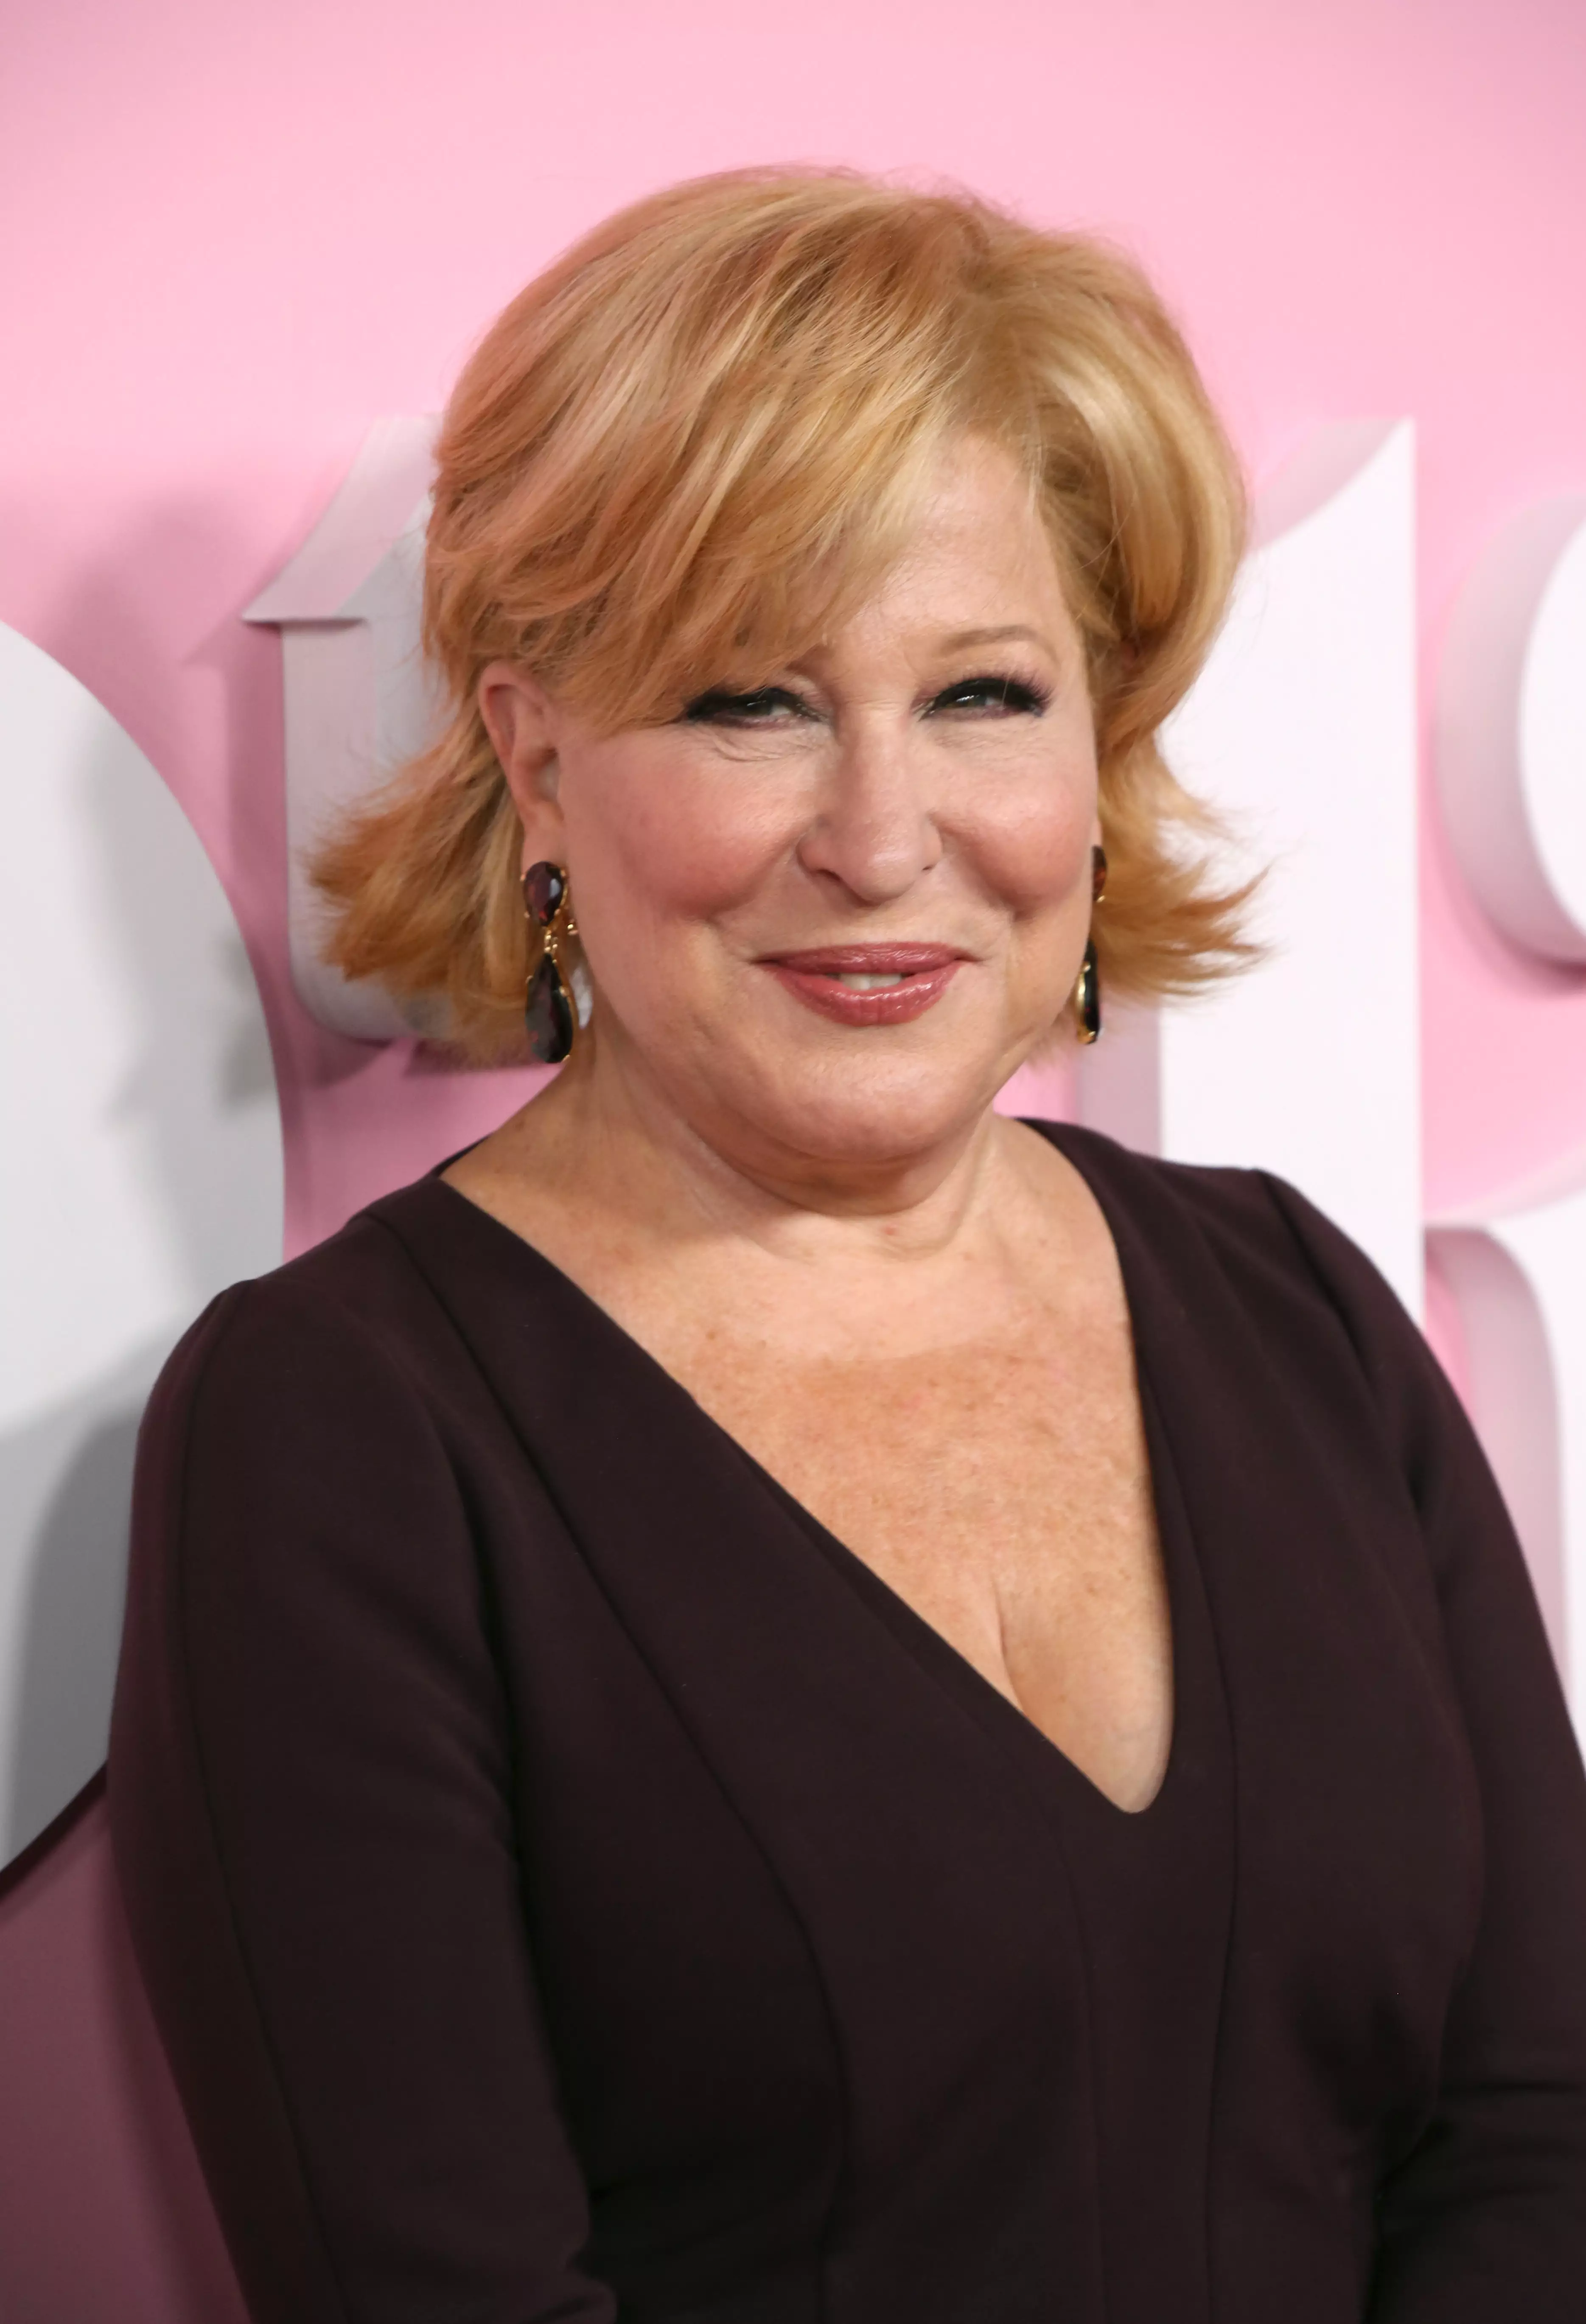 It wouldn't be 'Hocus Pocus' without Bette Midler! (